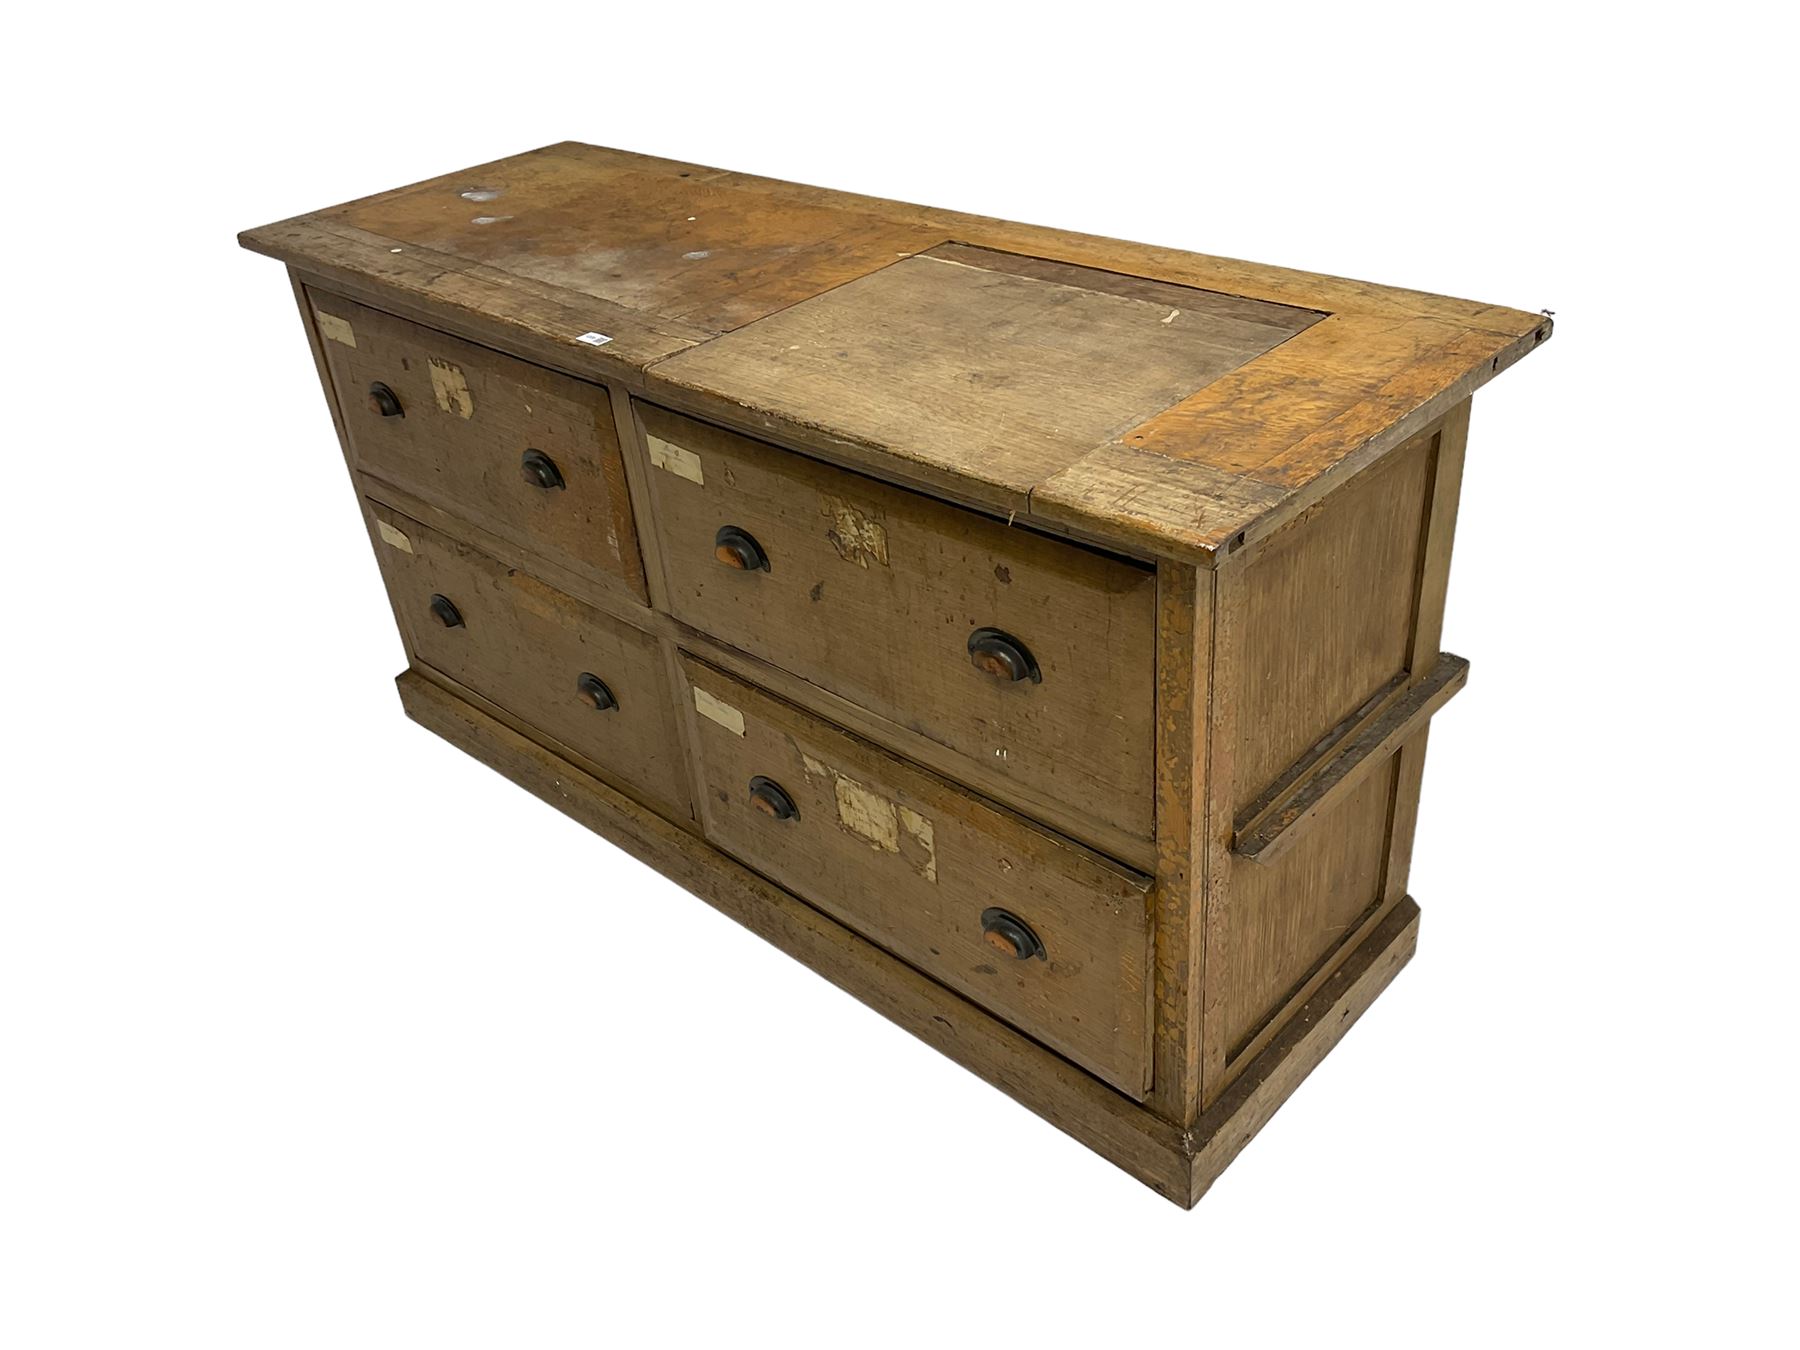 19th century rustic pine chest - Image 2 of 5